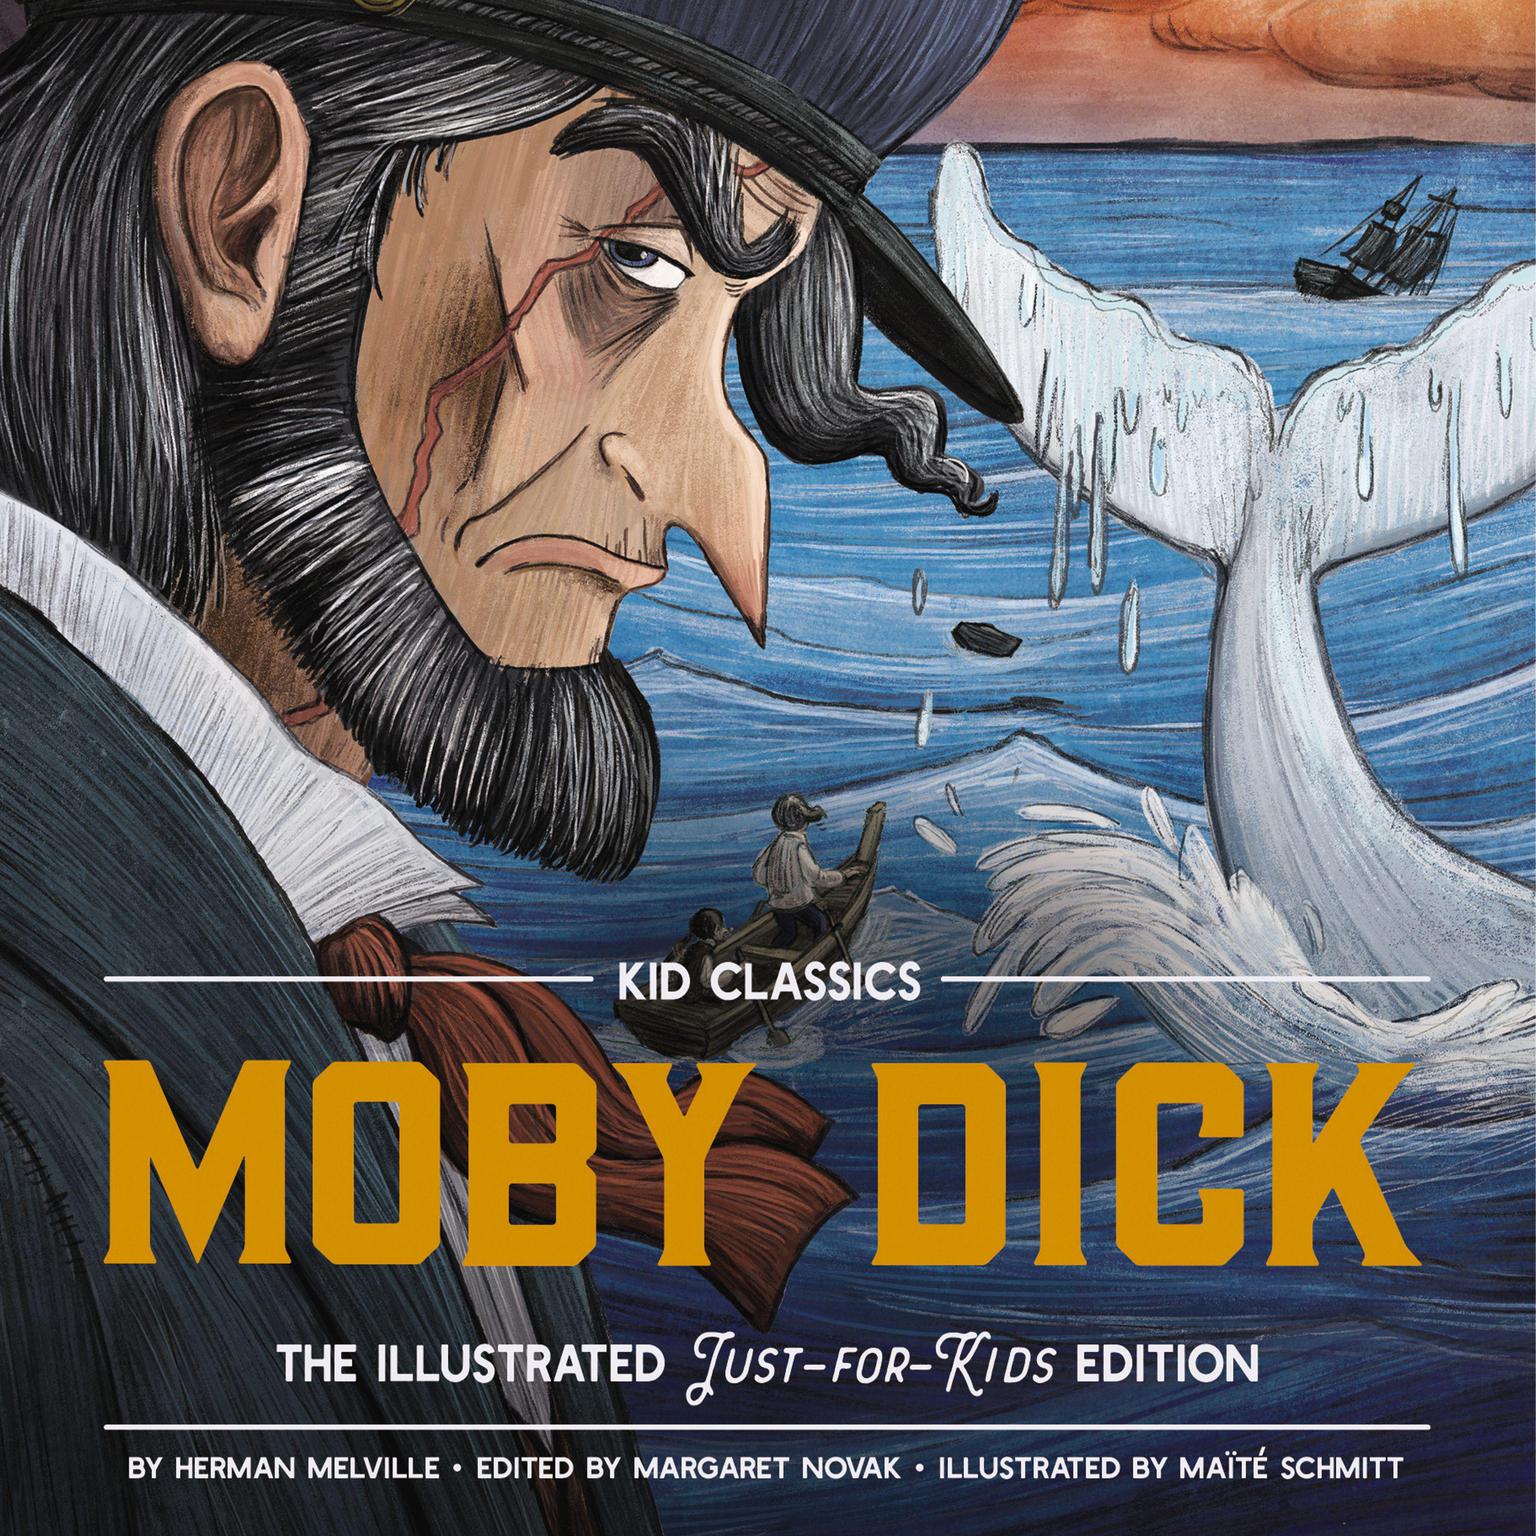 Moby Dick - Kid Classics (Abridged): The Classic Edition Reimagined Just-for-Kids! Audiobook, by Herman Melville